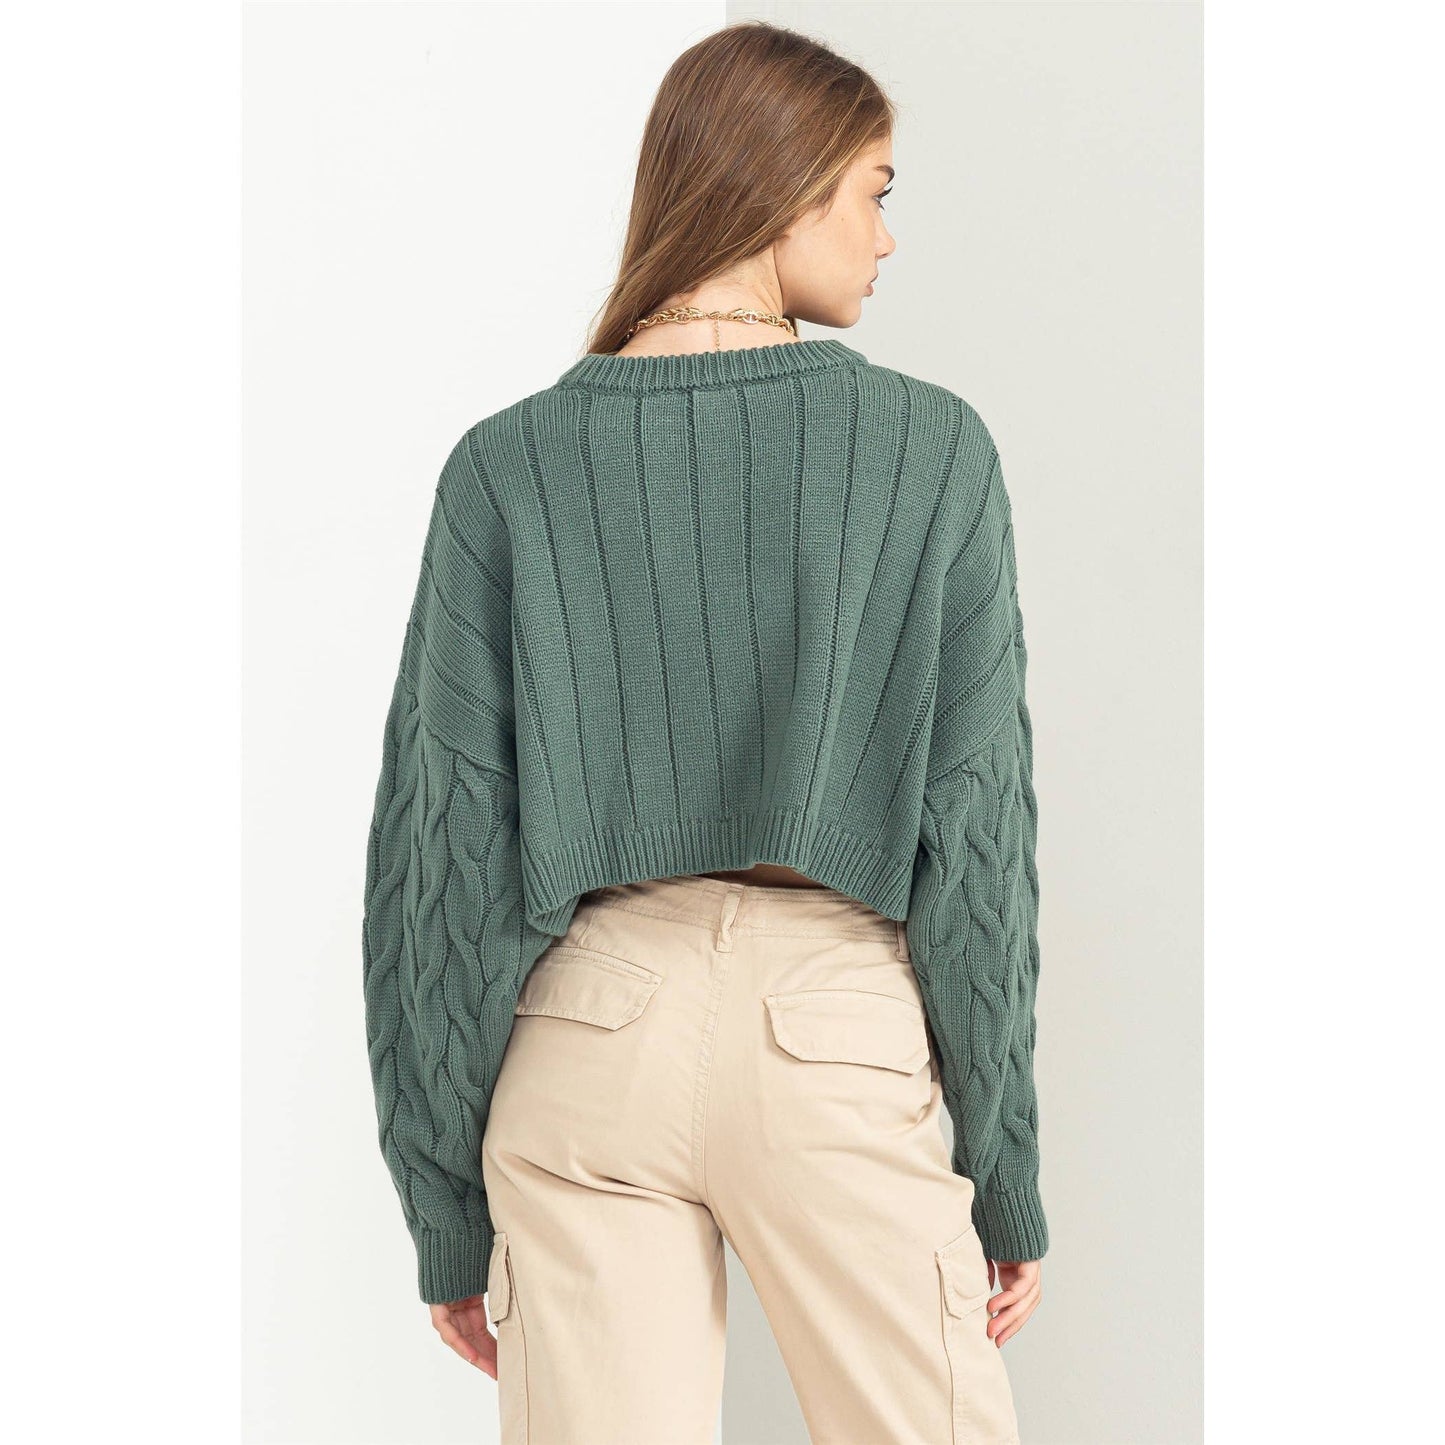 WEEKEND READY CABLE KNIT LONG SLEEVE CROP SWEATER: WISTERIA / S